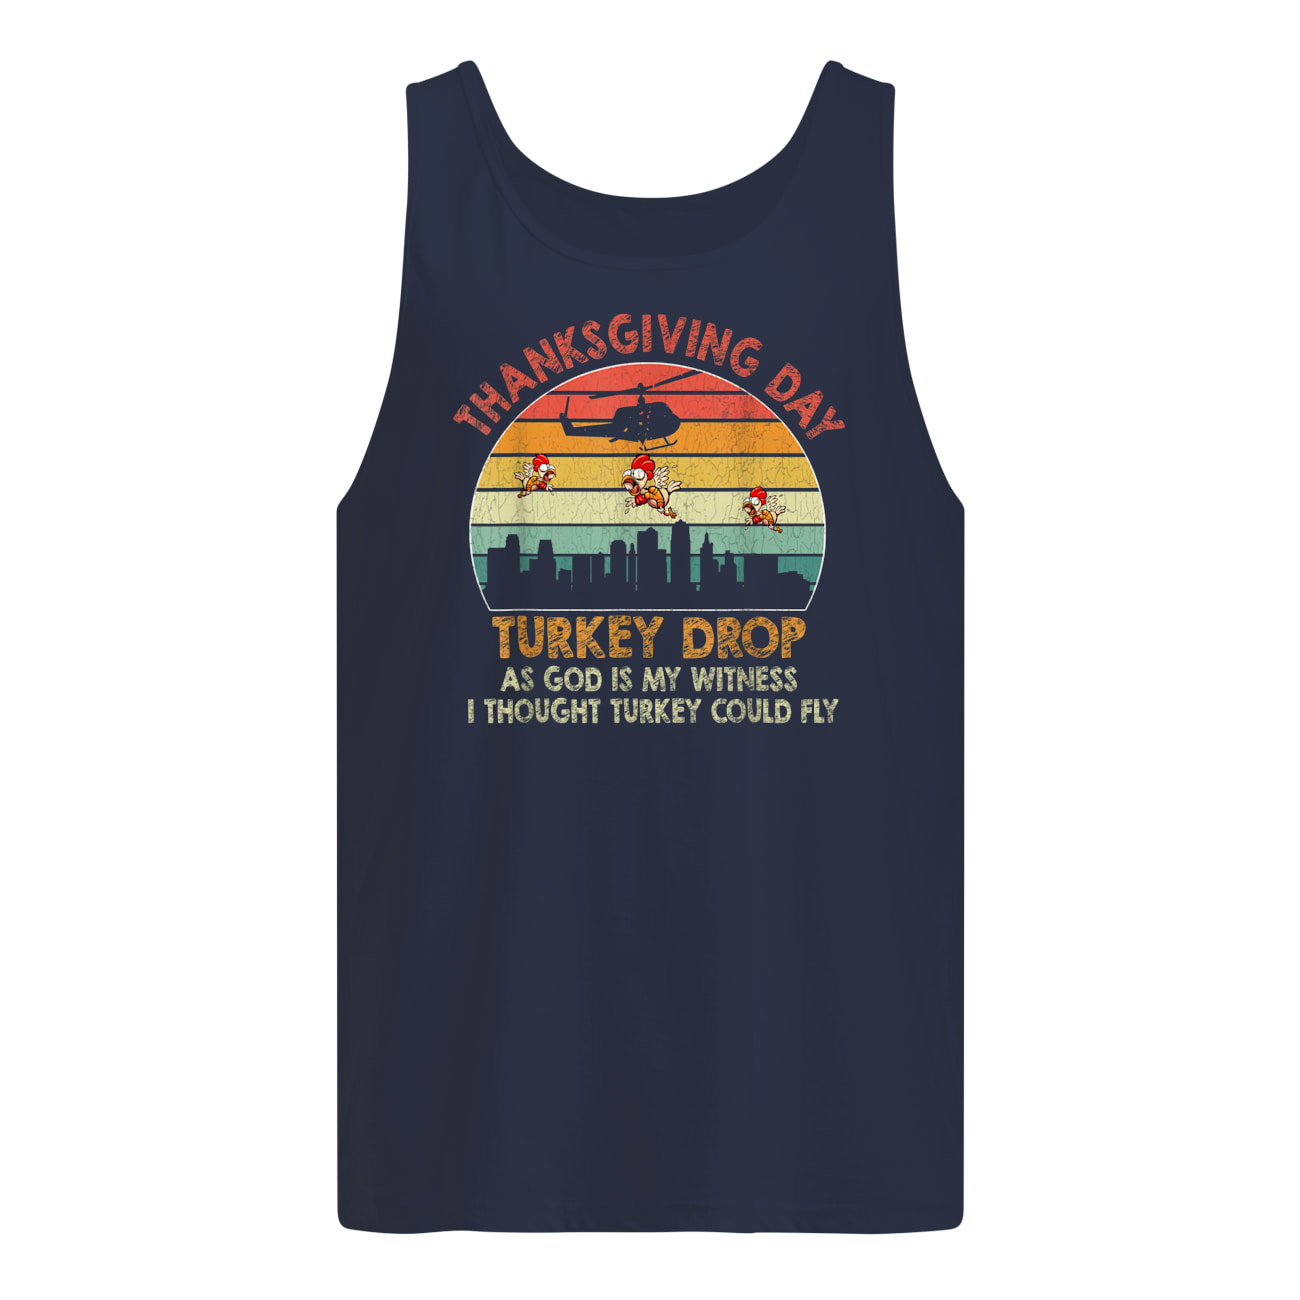 Vintage thanksgiving day turkey drop as god is my witness i thought turkey could fly tank top